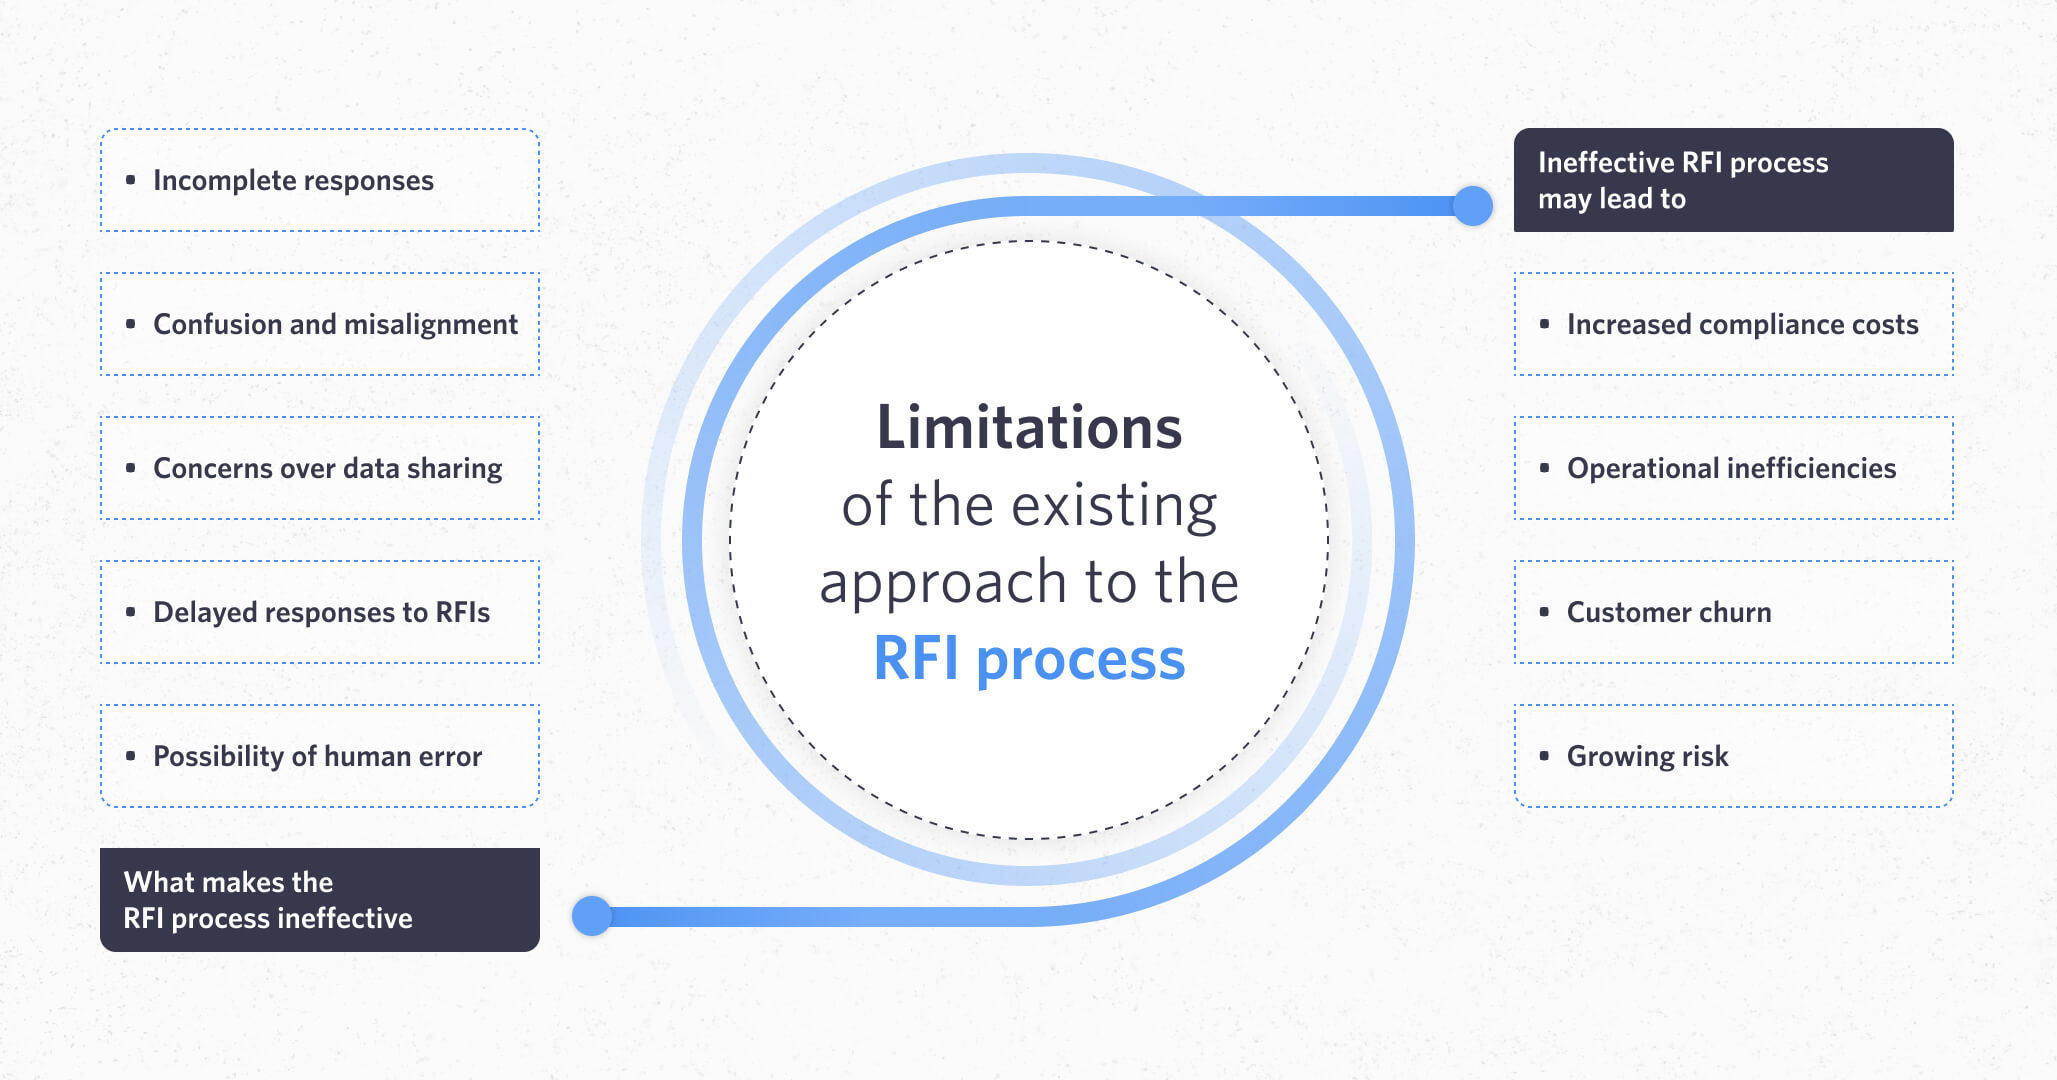 Limitations of the existing approach of the RFI process